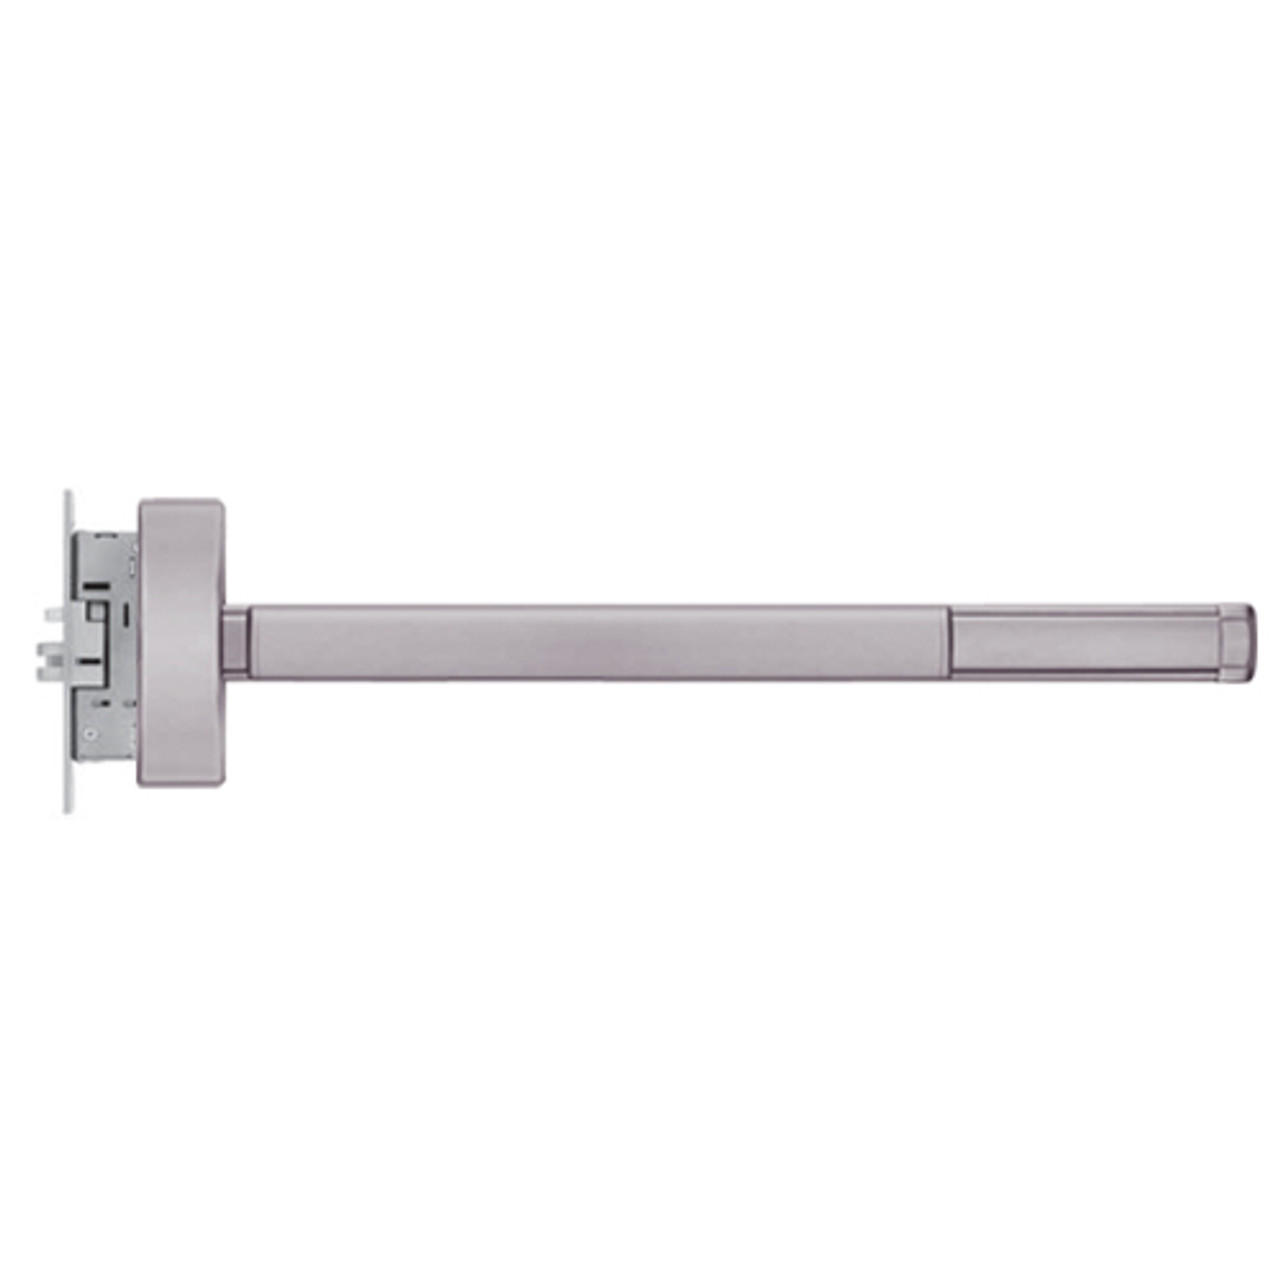 ELRFL2314-LHR-630-48 PHI 2300 Series Fire Rated Apex Mortise Exit Device with Electric Latch Retraction Prepped for Lever-Knob Always Active in Satin Stainless Steel Finish